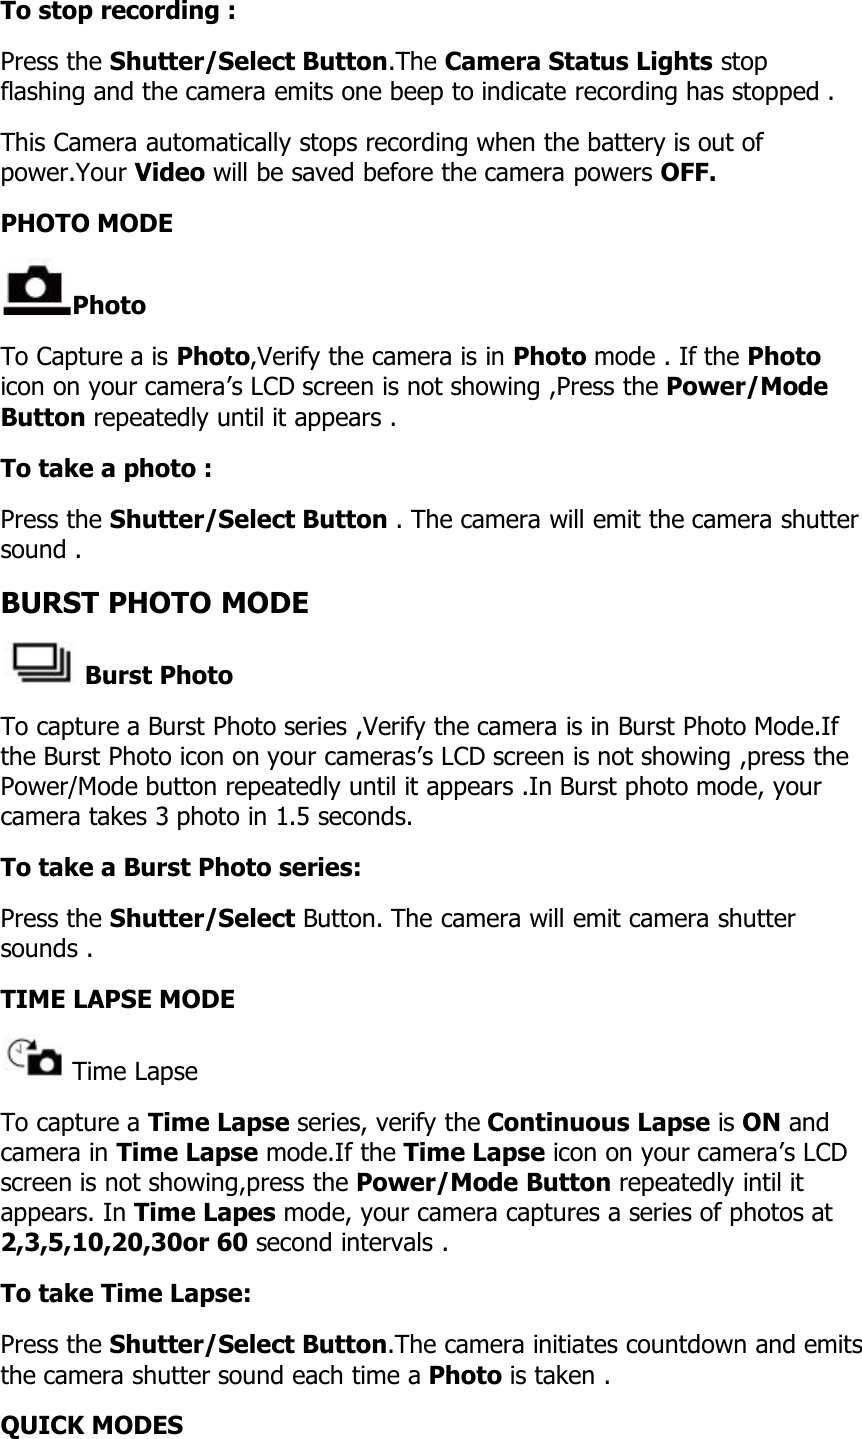 To stop recording :Press the Shutter/Select Button.The Camera Status Lights stopflashing and the camera emits one beep to indicate recording has stopped .This Camera automatically stops recording when the battery is out ofpower.Your Video will be saved before the camera powers OFF.PHOTO MODEPhotoTo Capture a is Photo,Verify the camera is in Photo mode . If the Photoicon on your camera’s LCD screen is not showing ,Press the Power/ModeButton repeatedly until it appears .To take a photo :Press the Shutter/Select Button . The camera will emit the camera shuttersound .BURST PHOTO MODEBurst PhotoTo capture a Burst Photo series ,Verify the camera is in Burst Photo Mode.Ifthe Burst Photo icon on your cameras’s LCD screen is not showing ,press thePower/Mode button repeatedly until it appears .In Burst photo mode, yourcamera takes 3 photo in 1.5 seconds.To take a Burst Photo series:Press the Shutter/Select Button. The camera will emit camera shuttersounds .TIME LAPSE MODETime LapseTo capture a Time Lapse series, verify the Continuous Lapse is ON andcamera in Time Lapse mode.If the Time Lapse icon on your camera’s LCDscreen is not showing,press the Power/Mode Button repeatedly intil itappears. In Time Lapes mode, your camera captures a series of photos at2,3,5,10,20,30or 60 second intervals .To take Time Lapse:Press the Shutter/Select Button.The camera initiates countdown and emitsthe camera shutter sound each time a Photo is taken .QUICK MODES